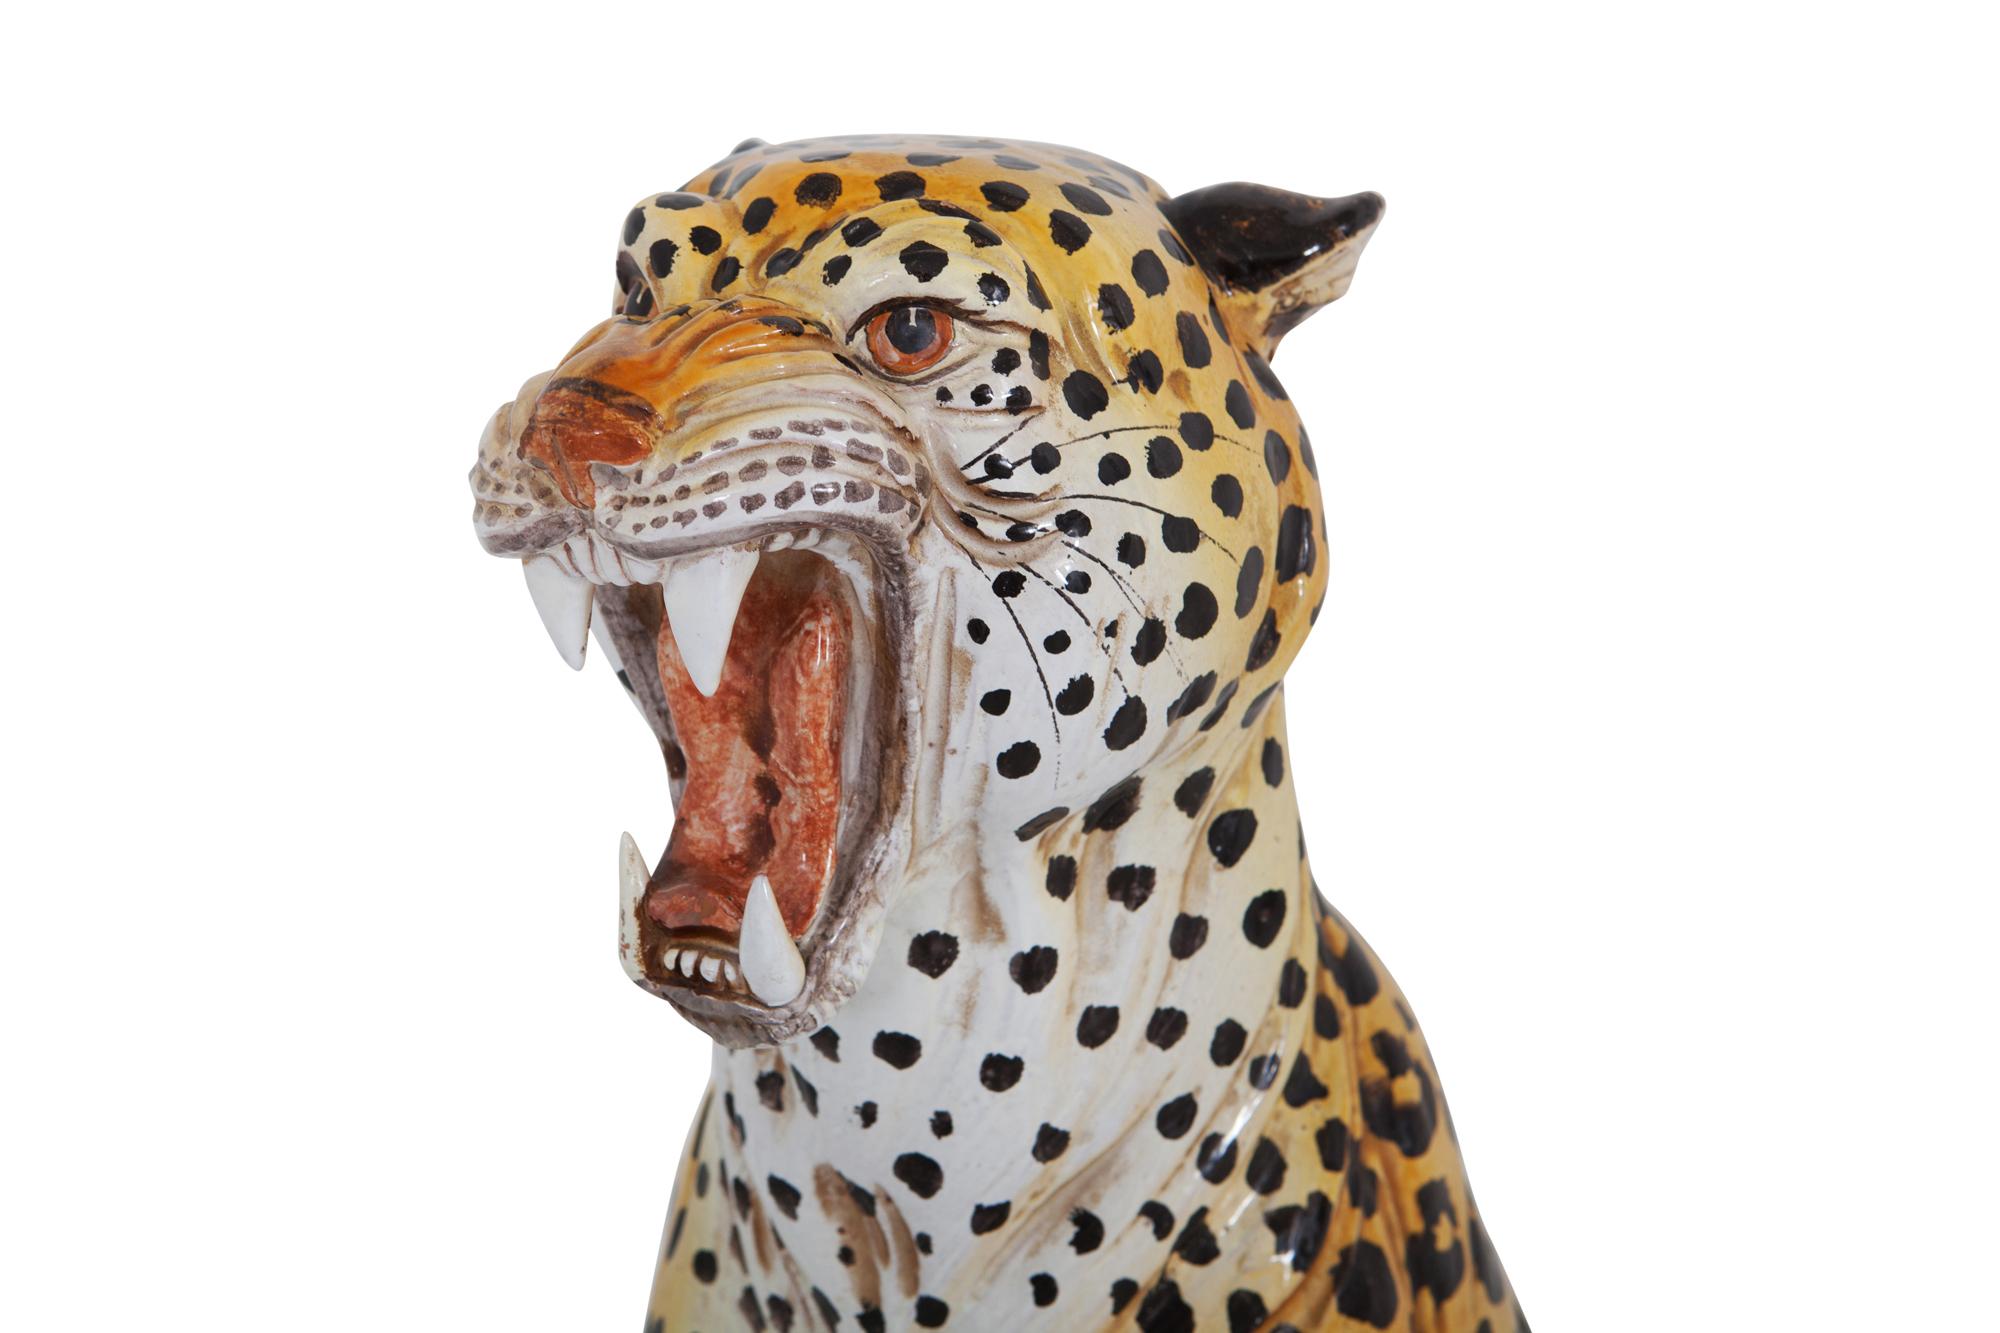 Mid-20th Century Leopard Ceramic Hand-Painted Sculptures from Italy, 1950s